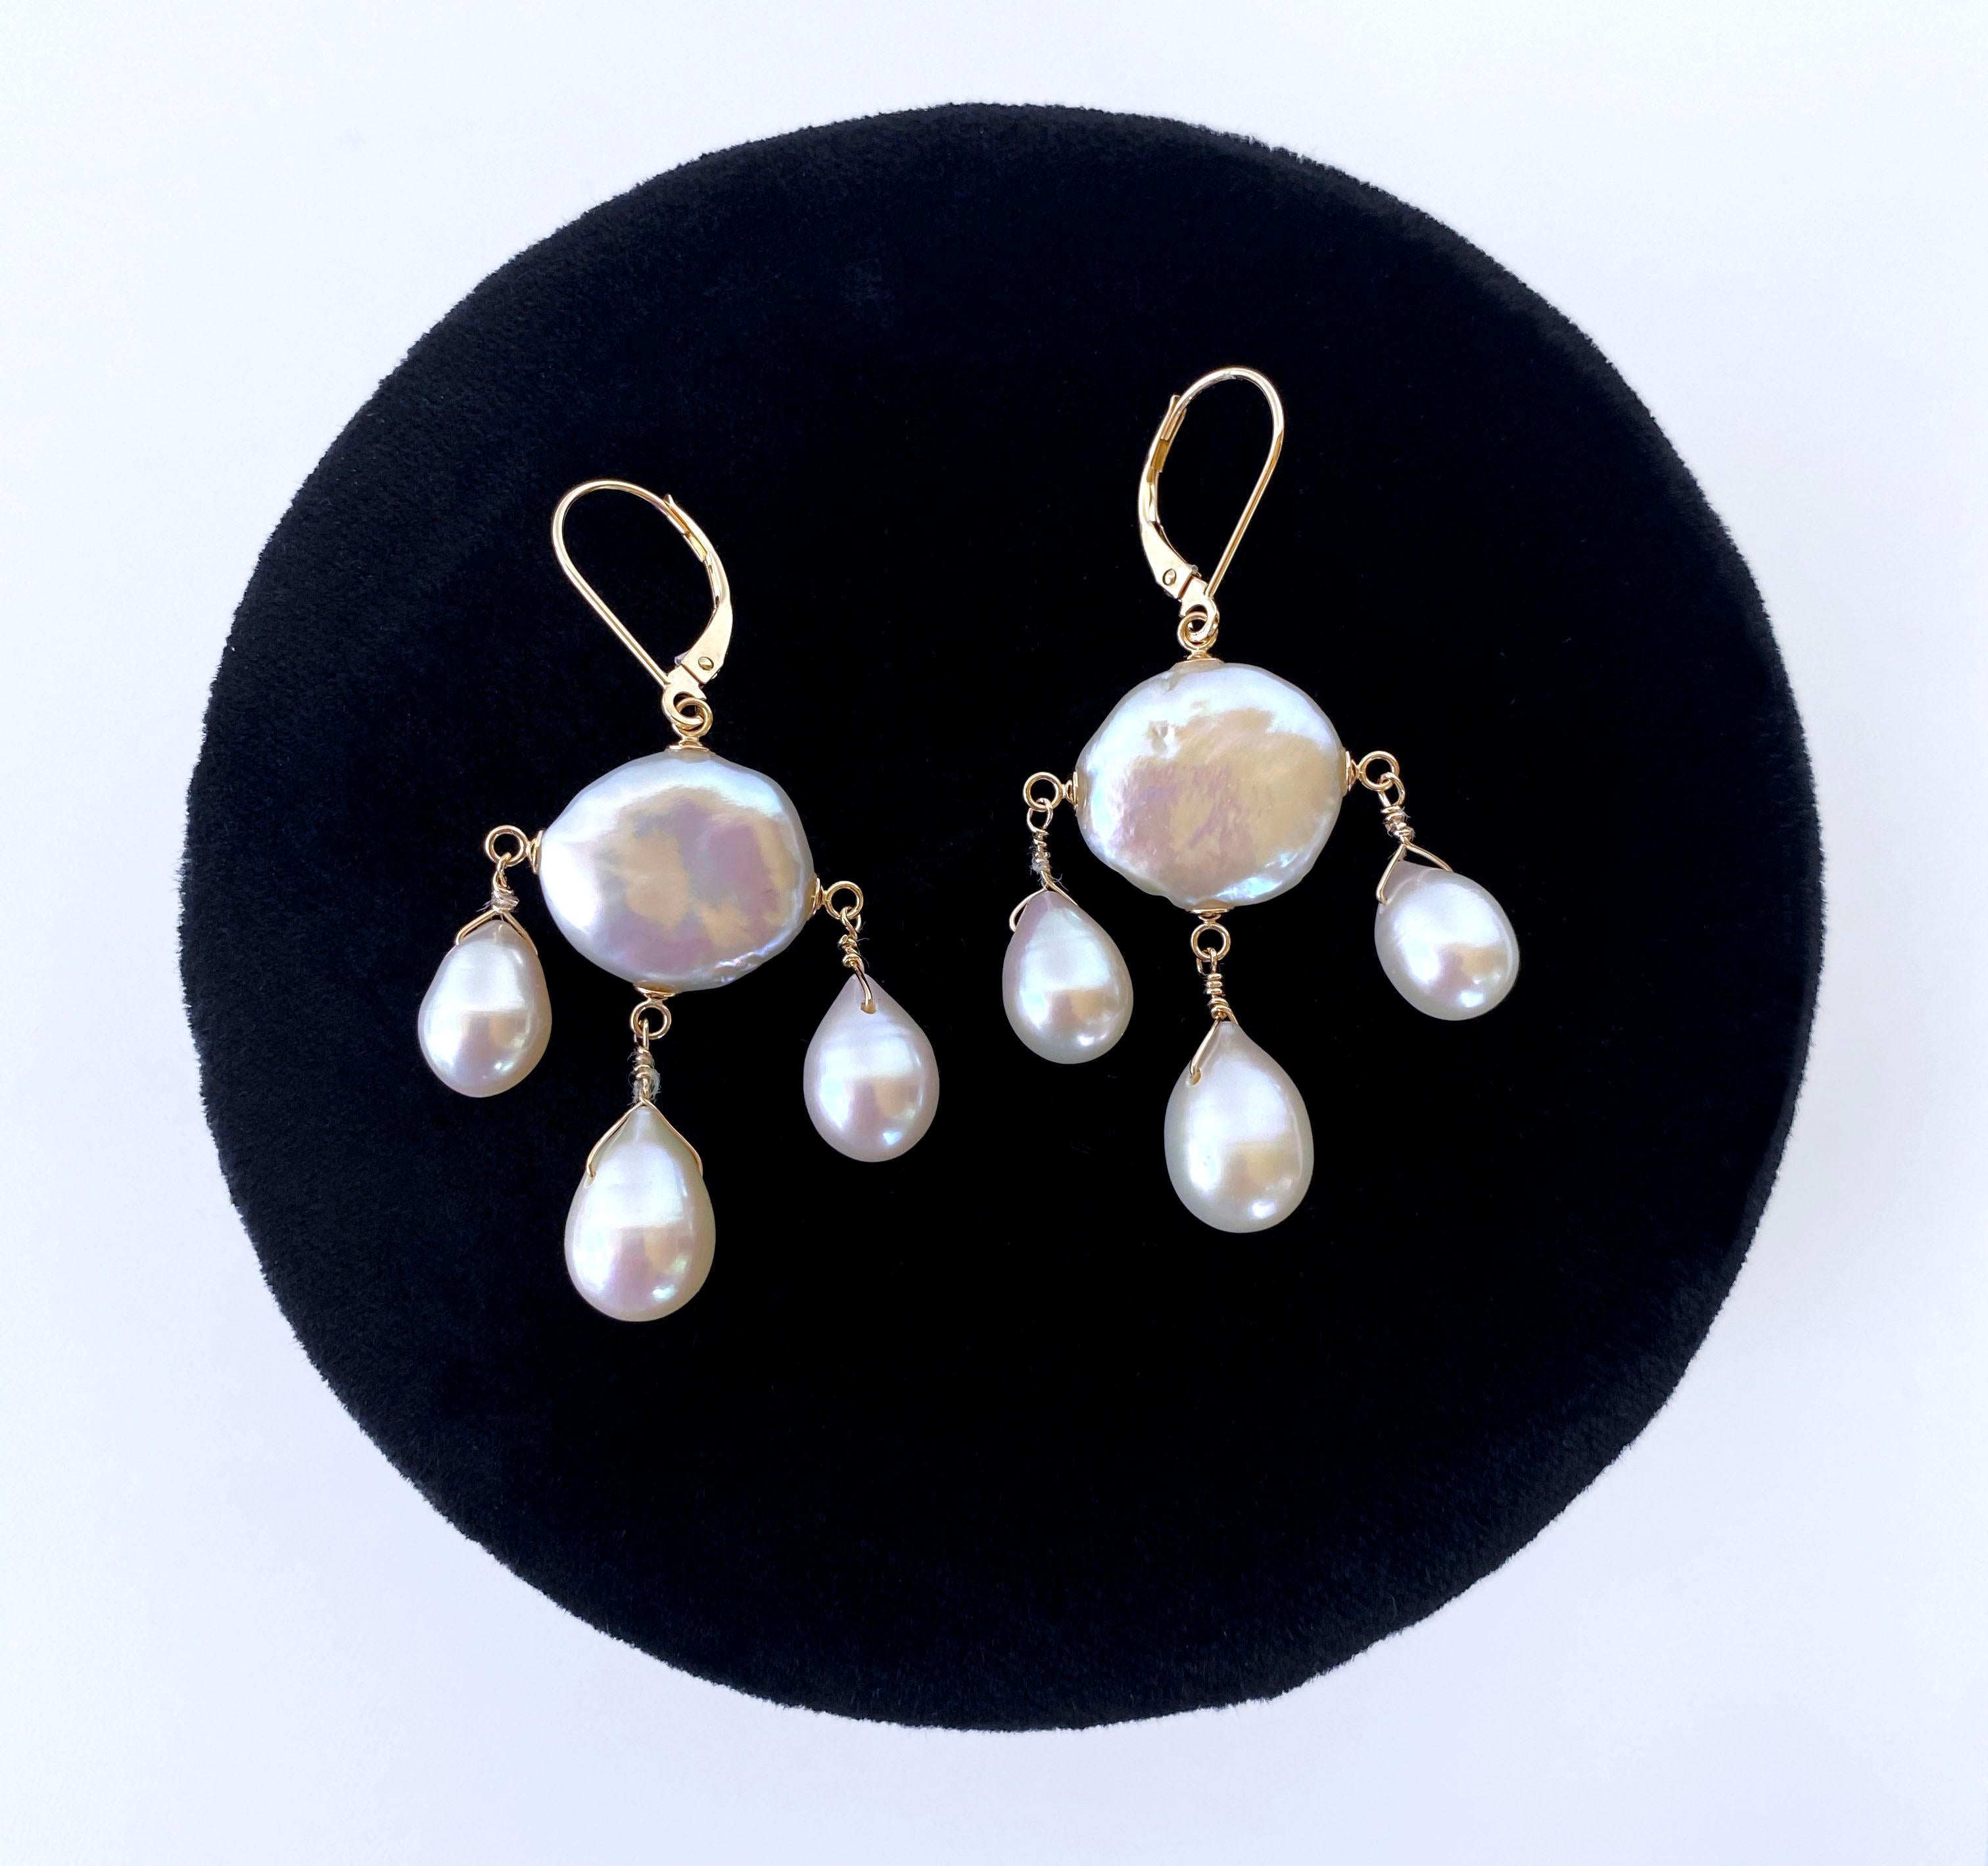 Gorgeous pair of chandelier handmade earrings by Marina J. This lovely pair feature high luster white Pearls that display beautiful hues of pinks and blues when hit with light. A large Baroque Coin Pearl hangs in the middle, from which three